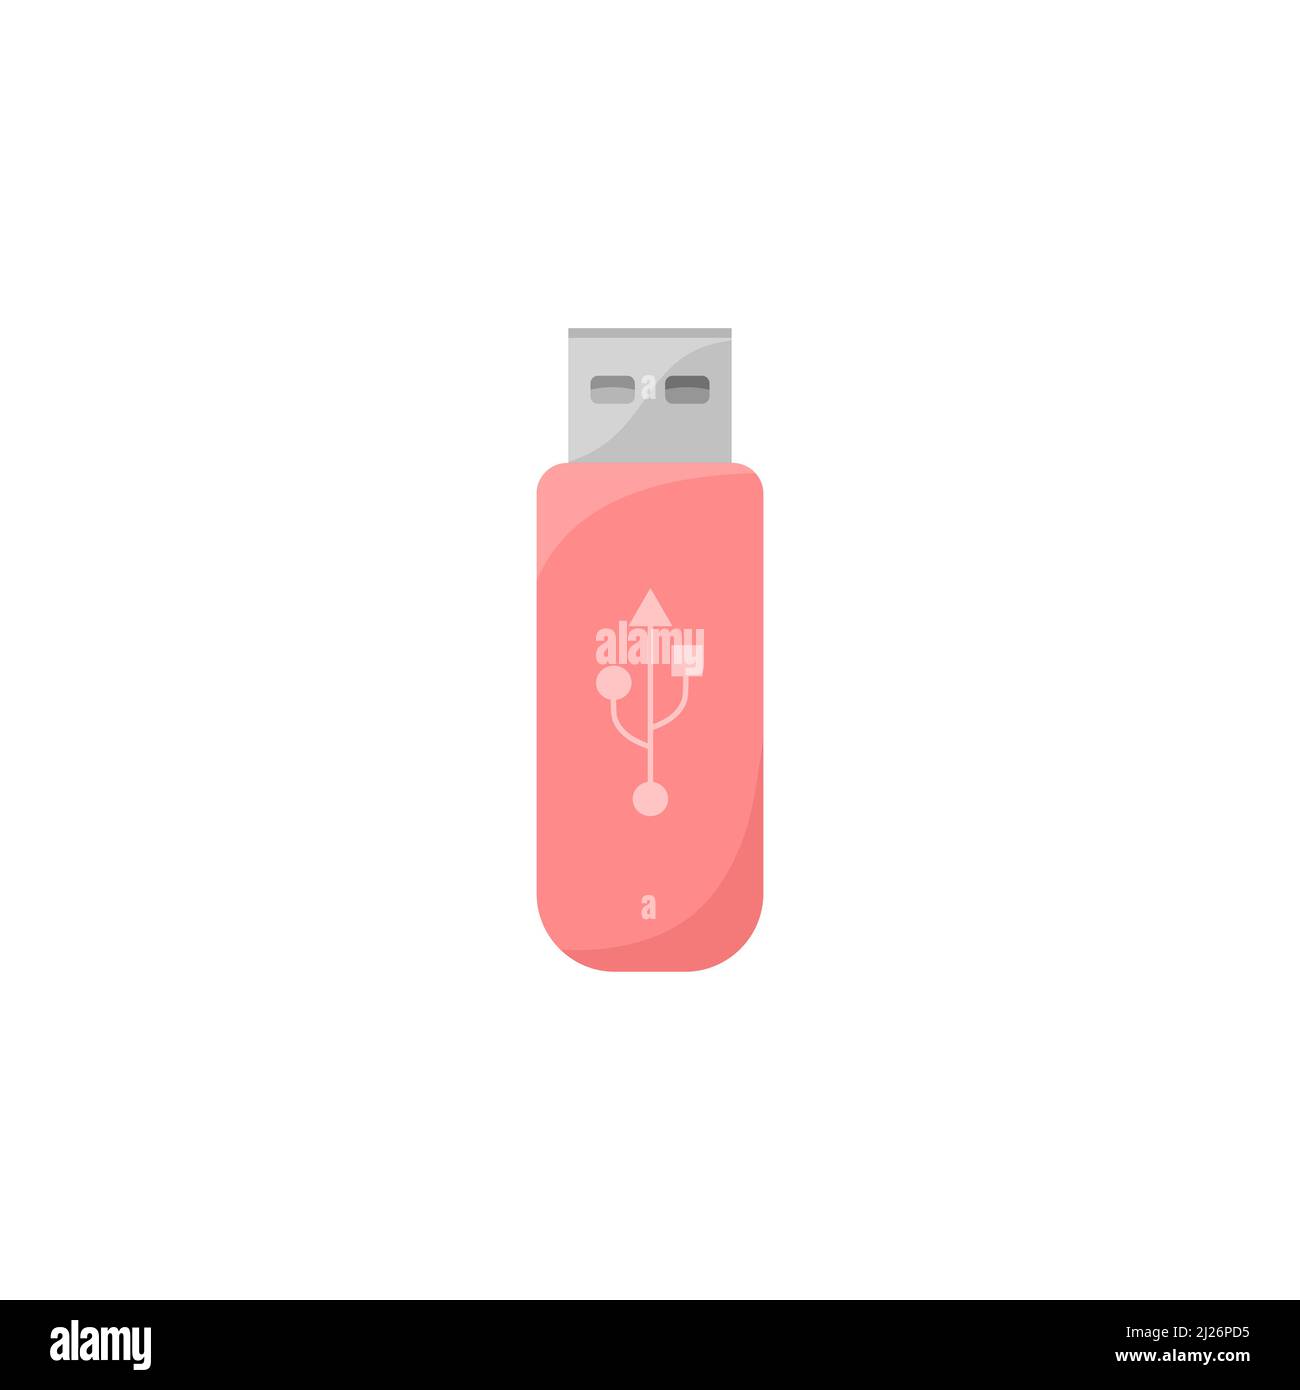 USB memory stick isolated. Flash drive digital storage device. USB data carrier on white background. Vector flat illustration. Stock Vector